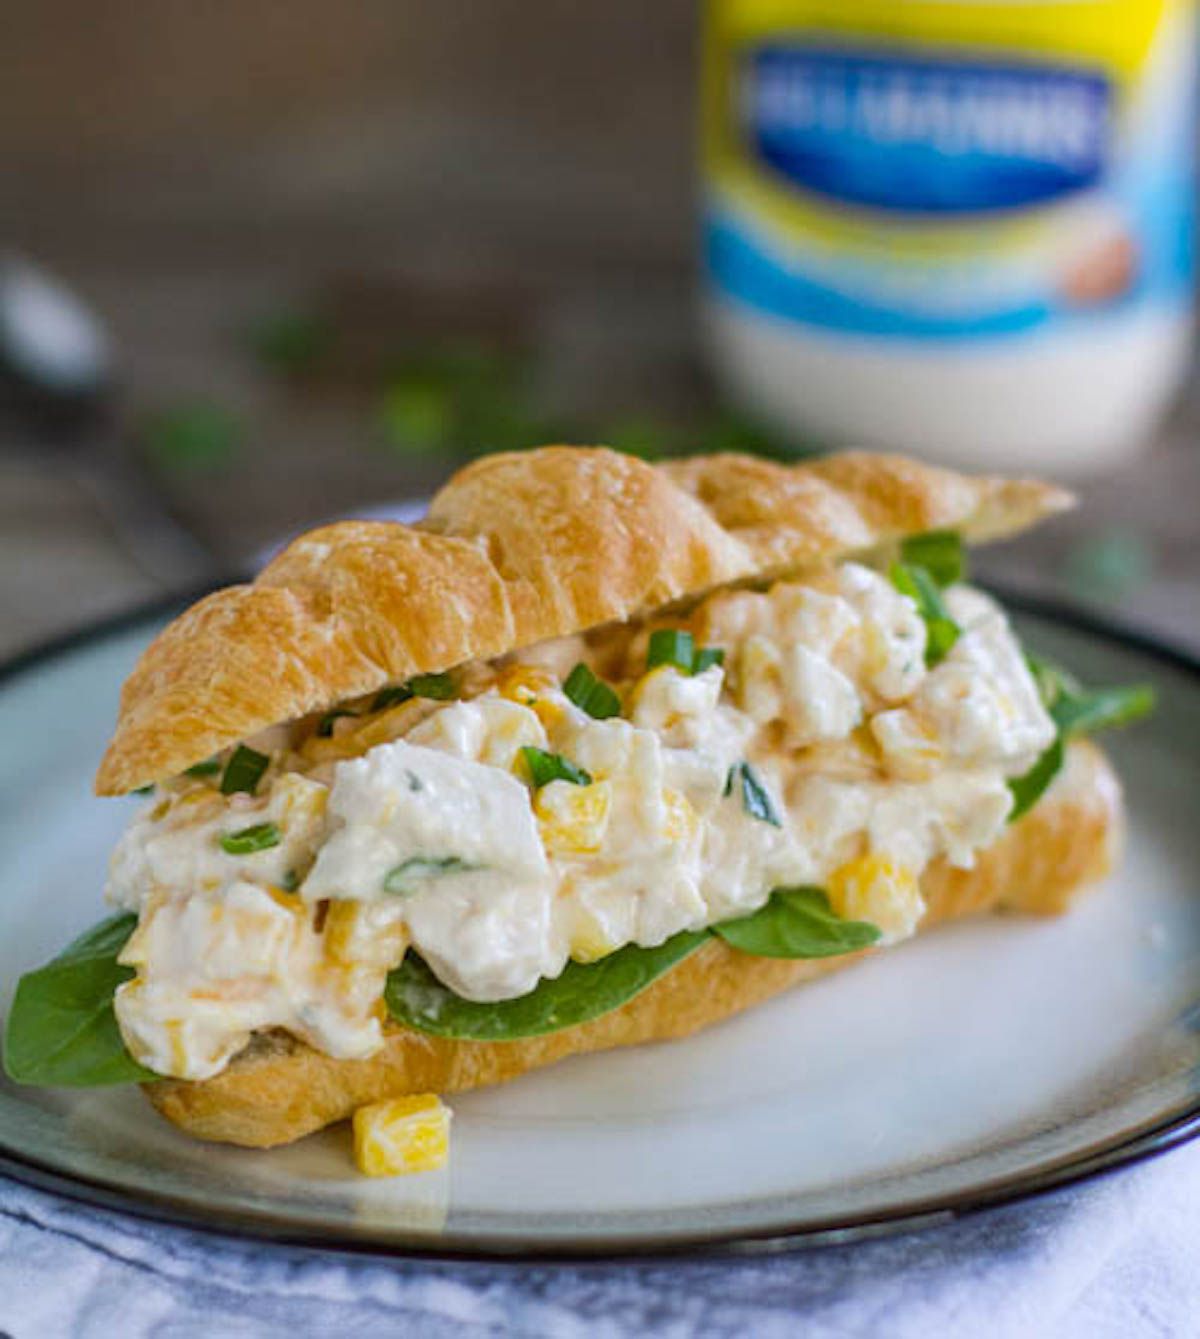 I needed to add a sandwich image eventually. Mango Chicken Salad in a croissant? Interesting.